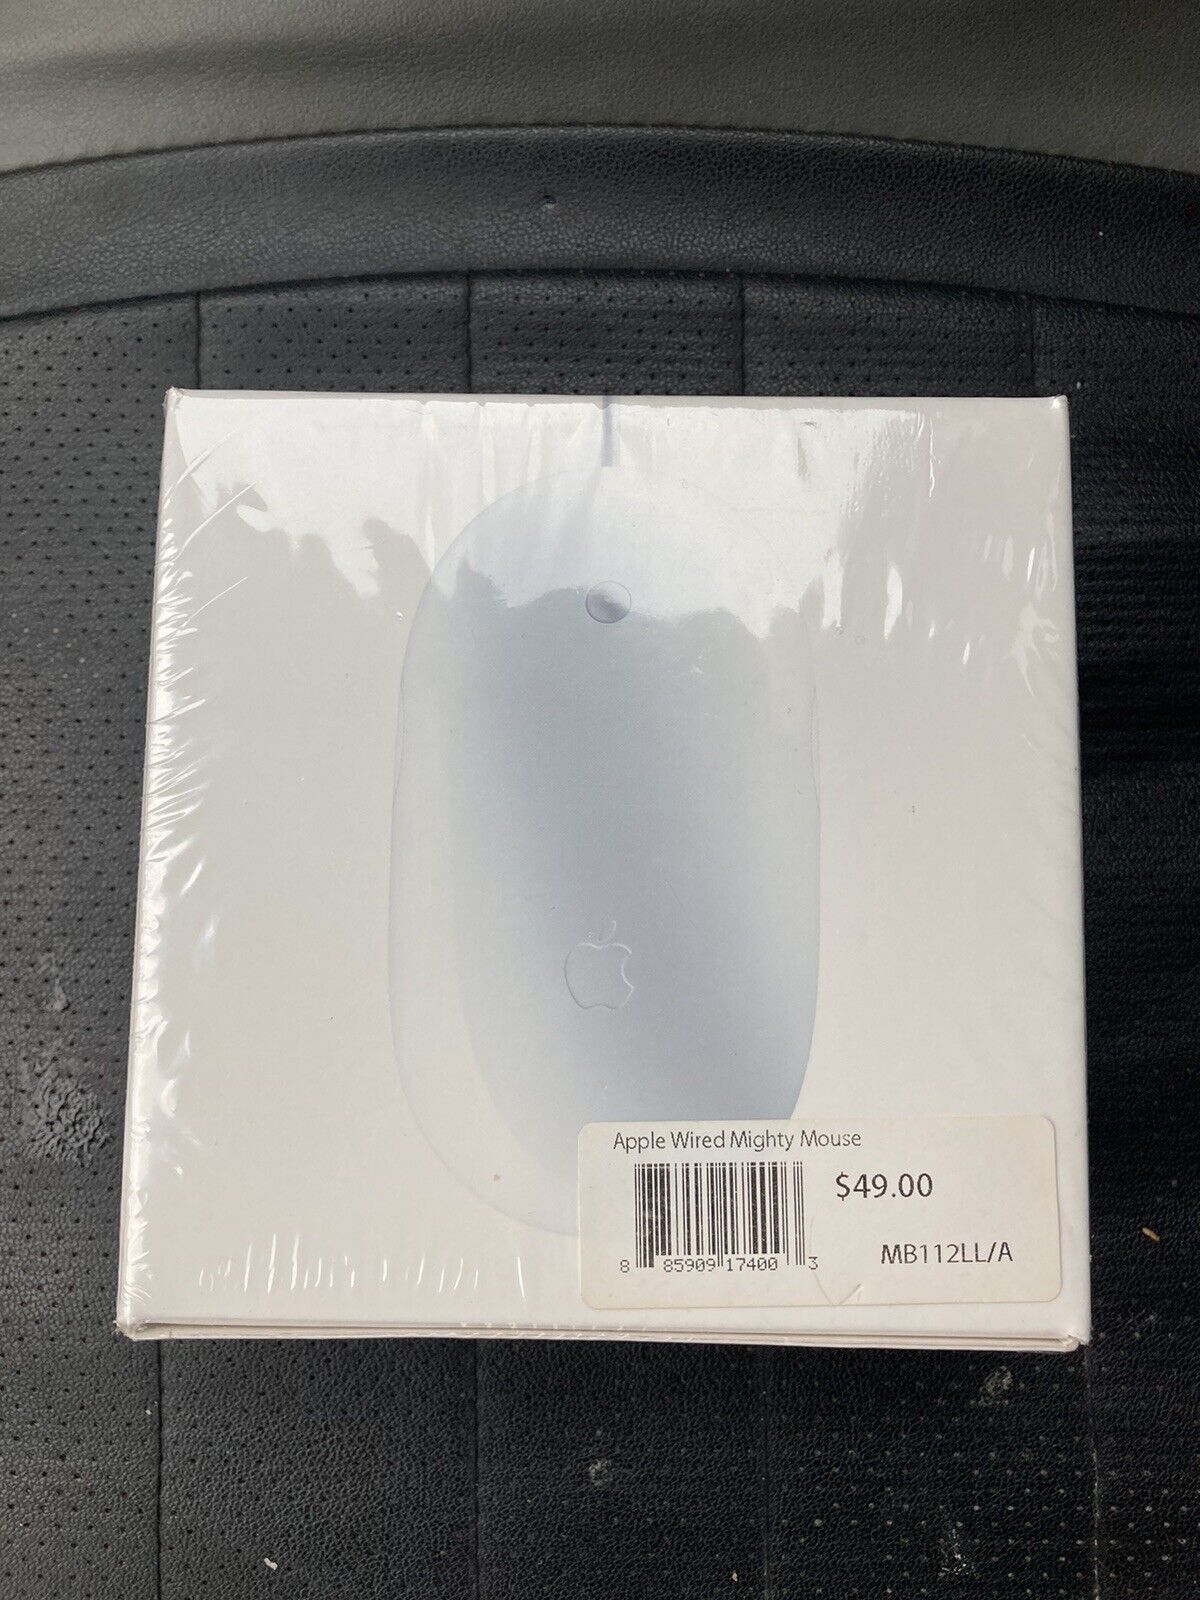 Vintage Apple Mighty Mouse Wired White Model A1152 MB112LL/A  SEALED in Box 2007